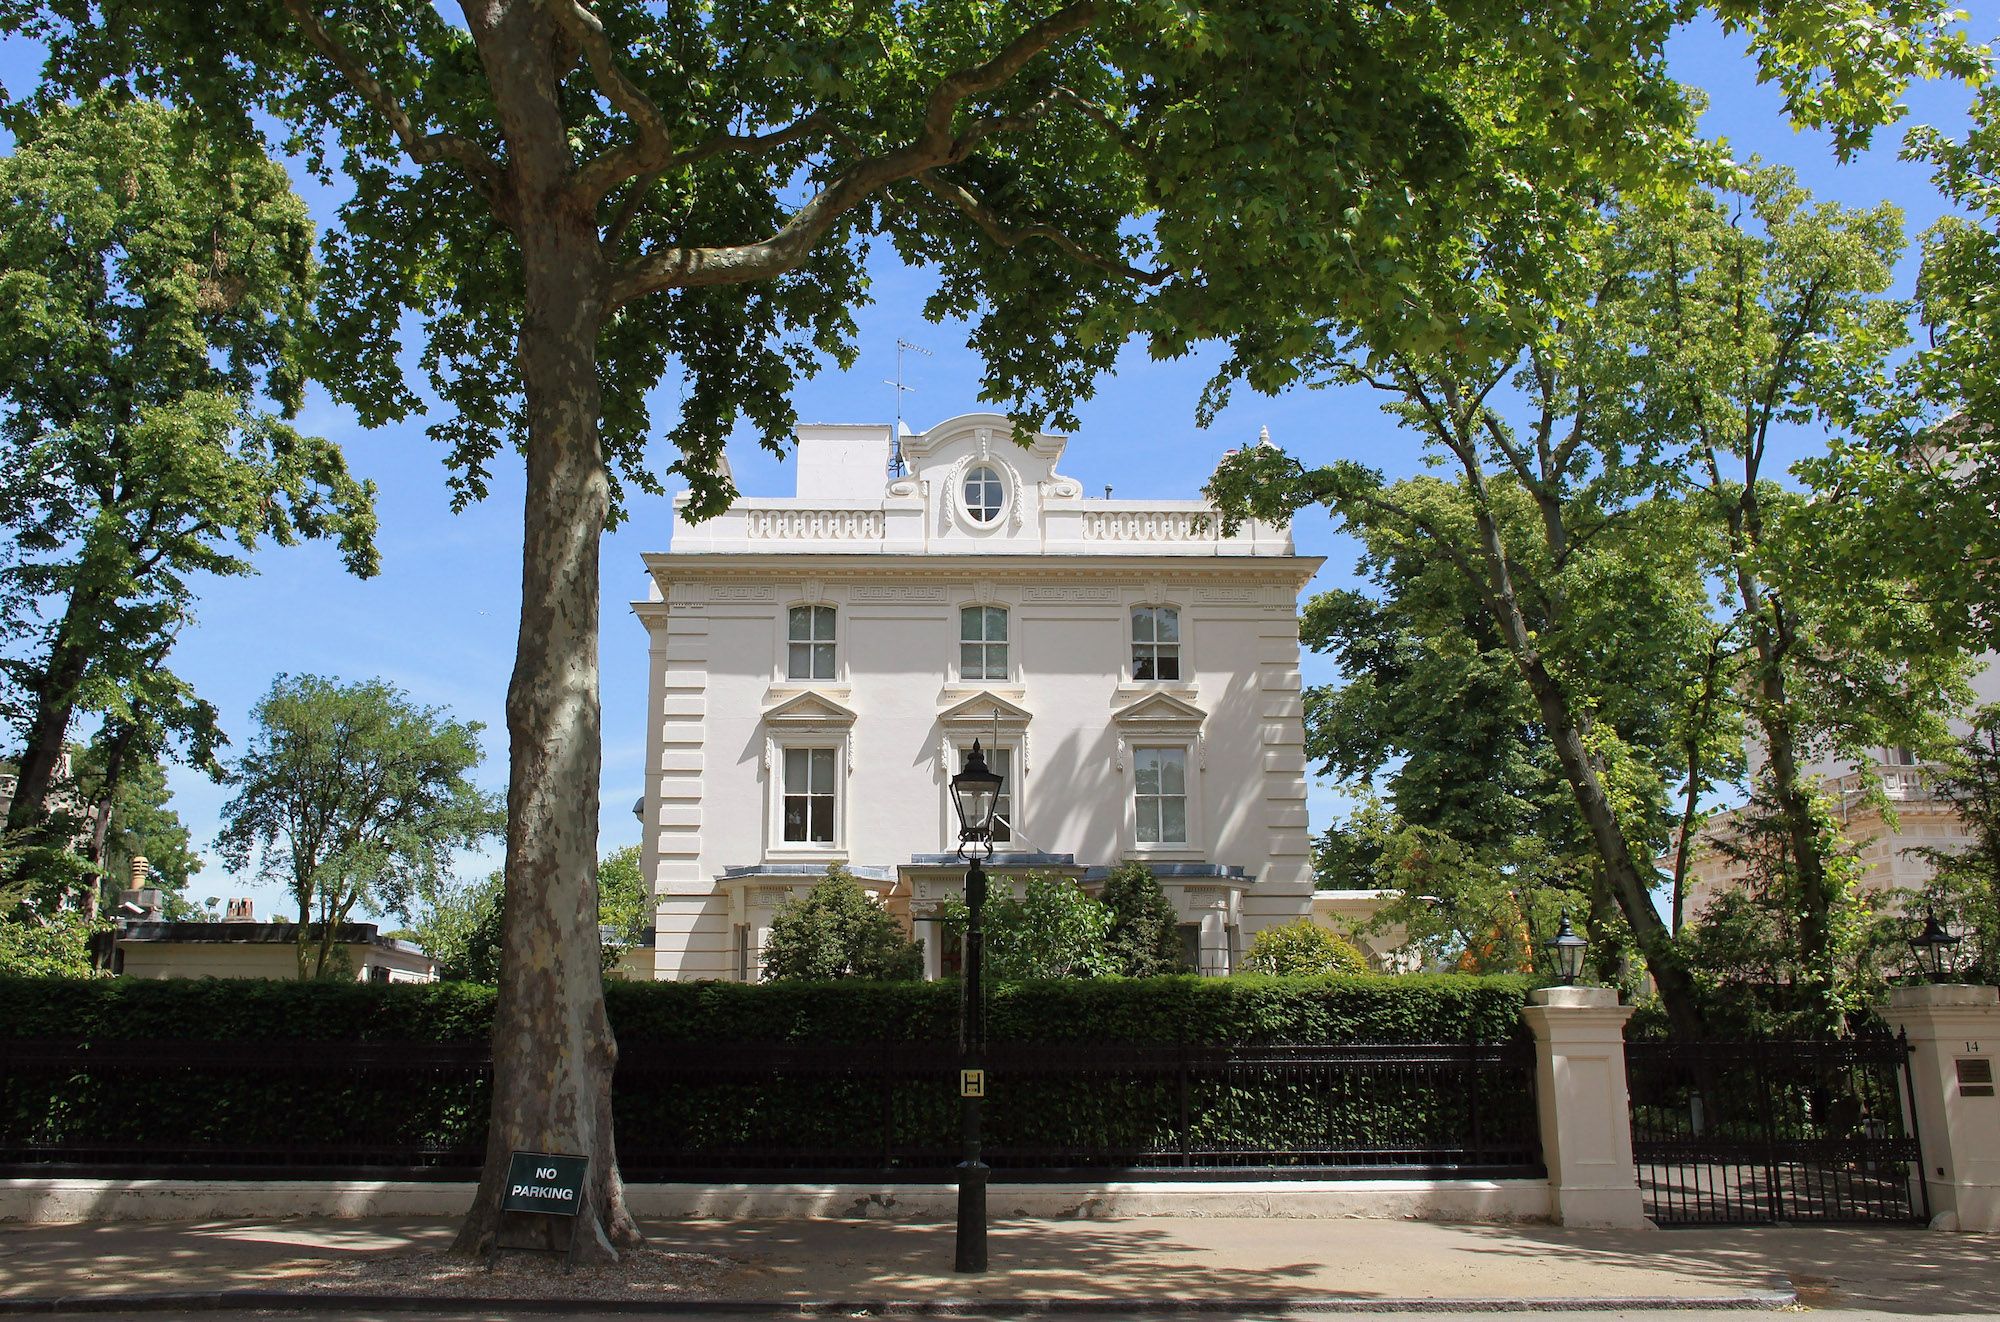 London's Kensington Palace Gardens Is Britain's Most Expensive Street